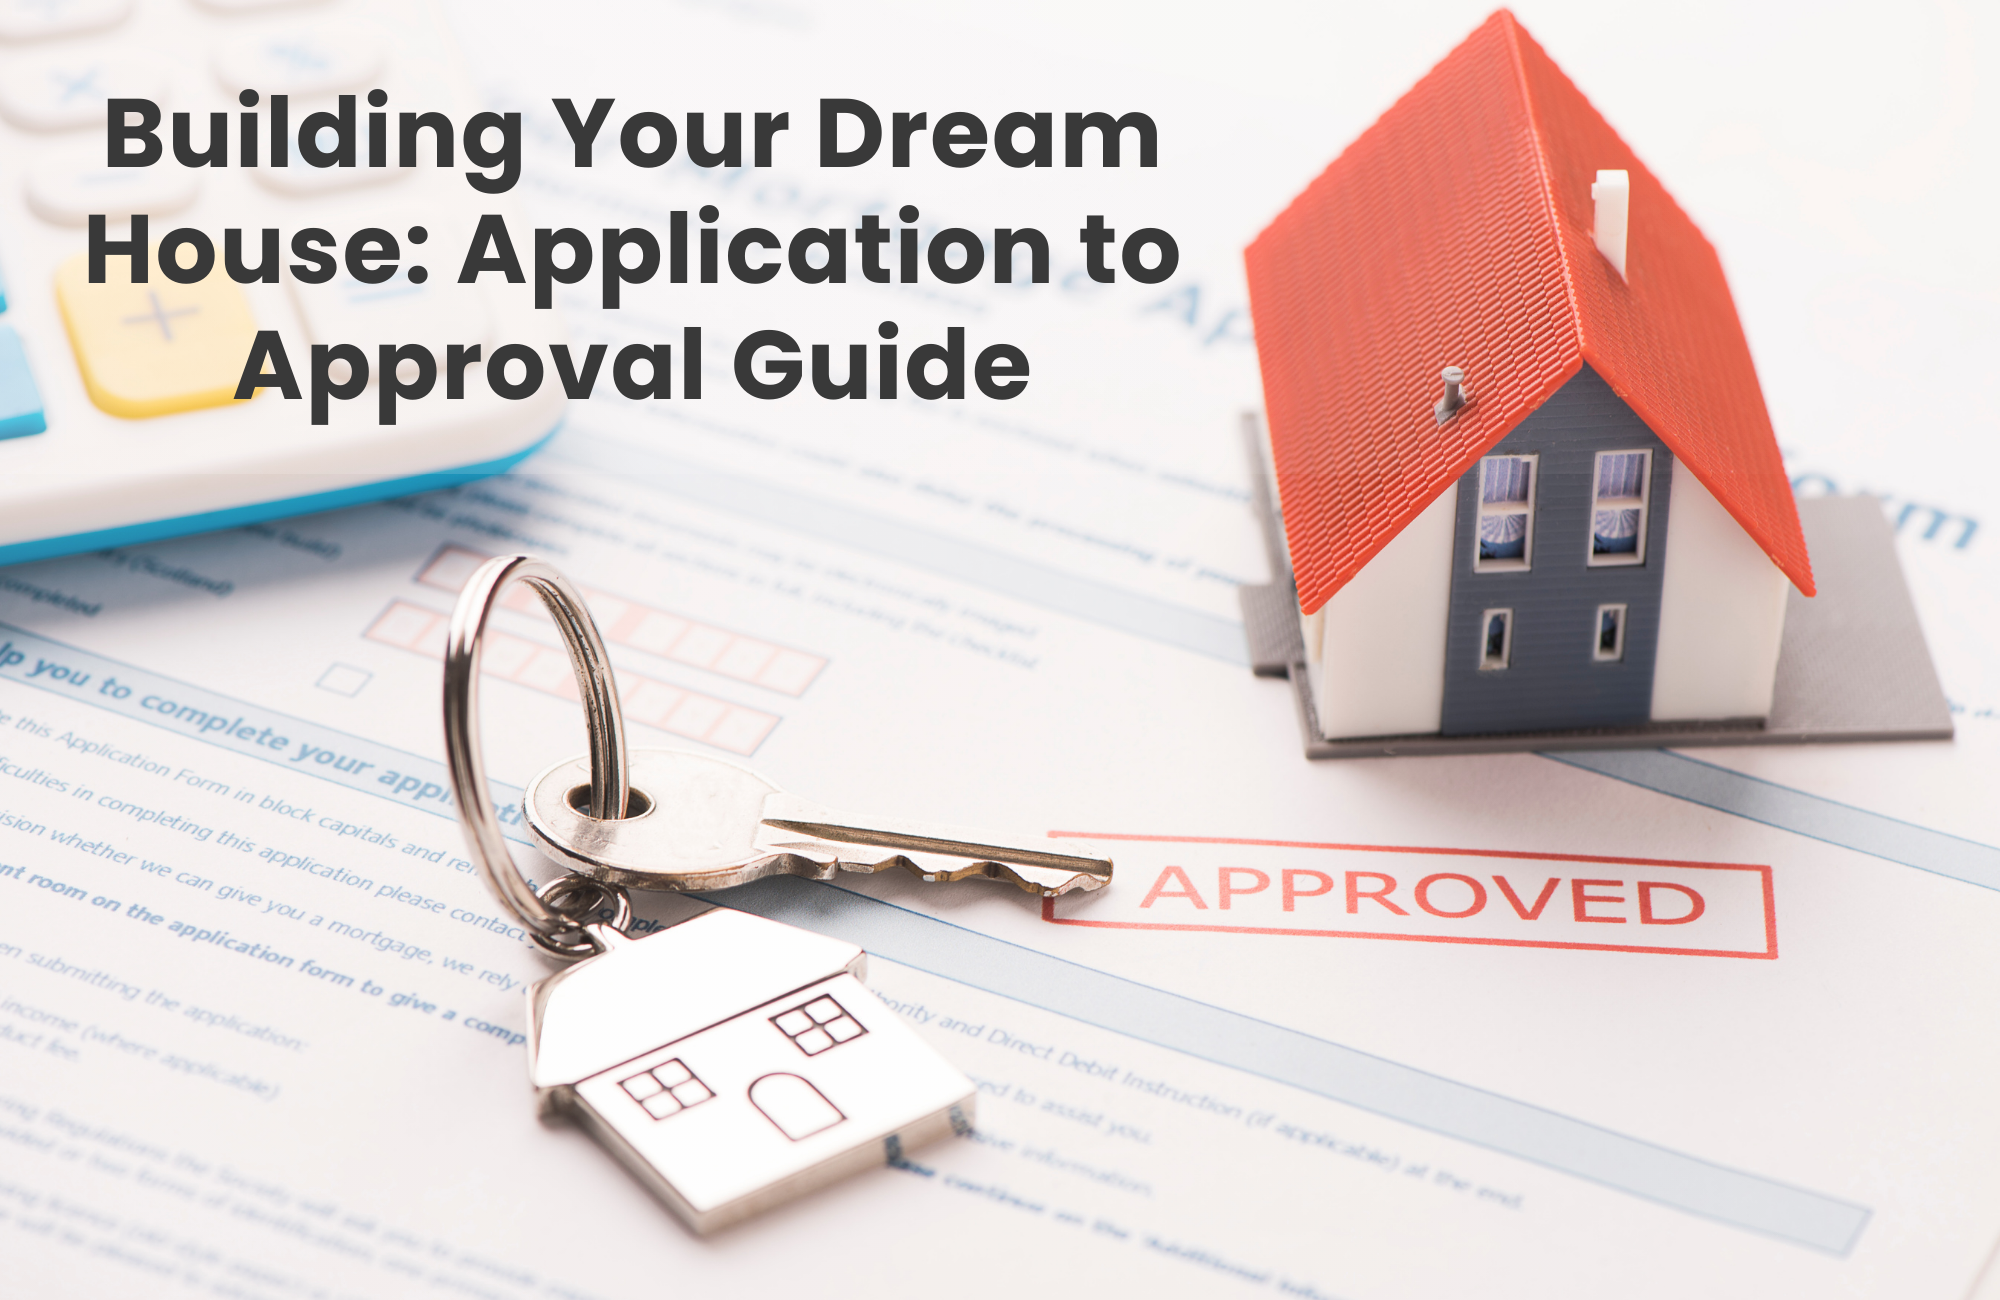 Process of Building Your Dream House